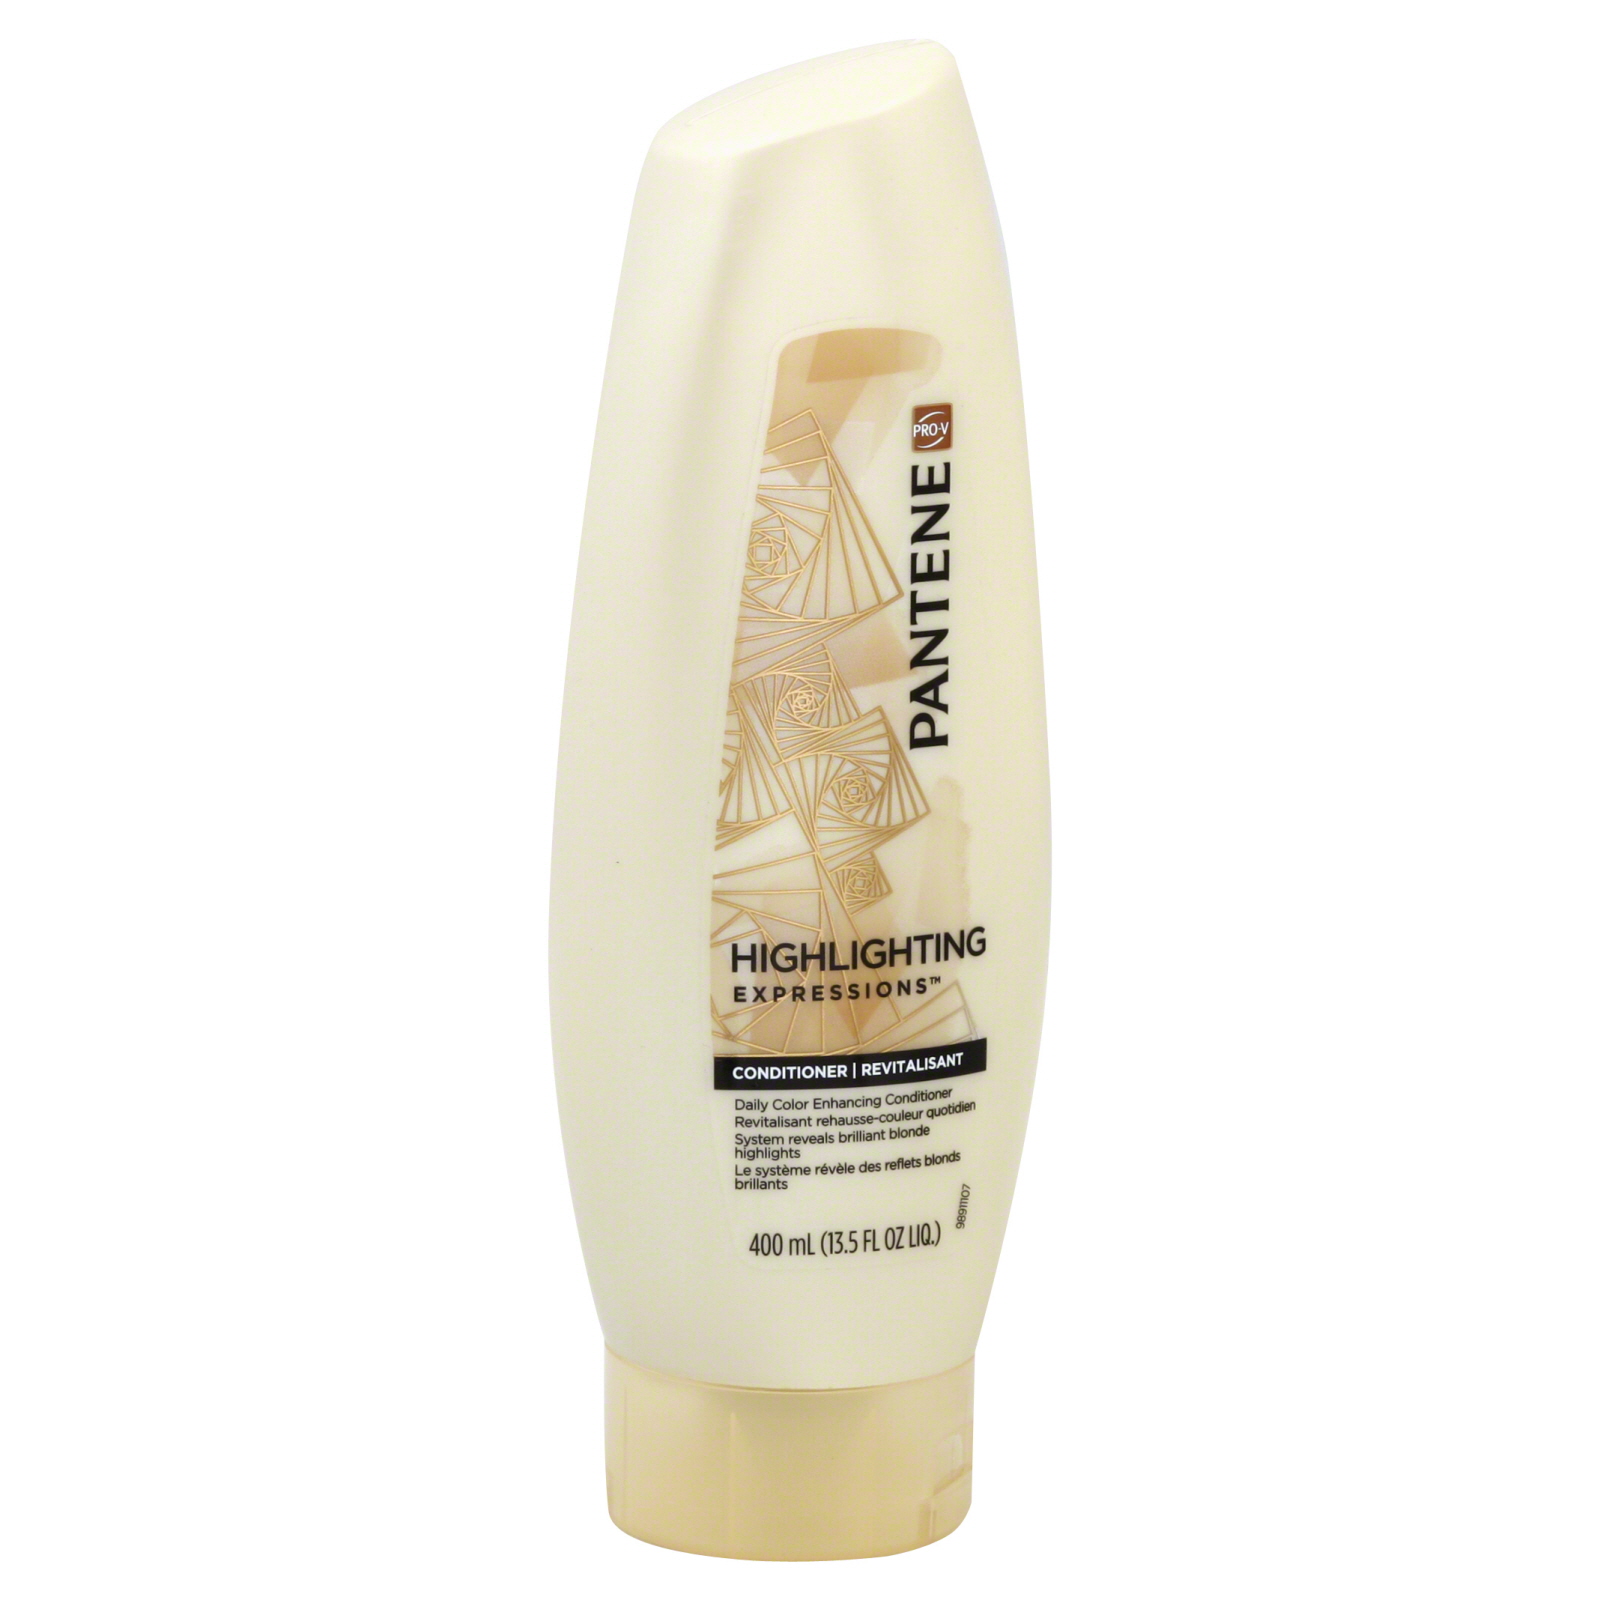 Pantene Pro-V Highlighting Expressions Conditioner, Daily Color Enhancing, 13.5 fl oz (400 ml)